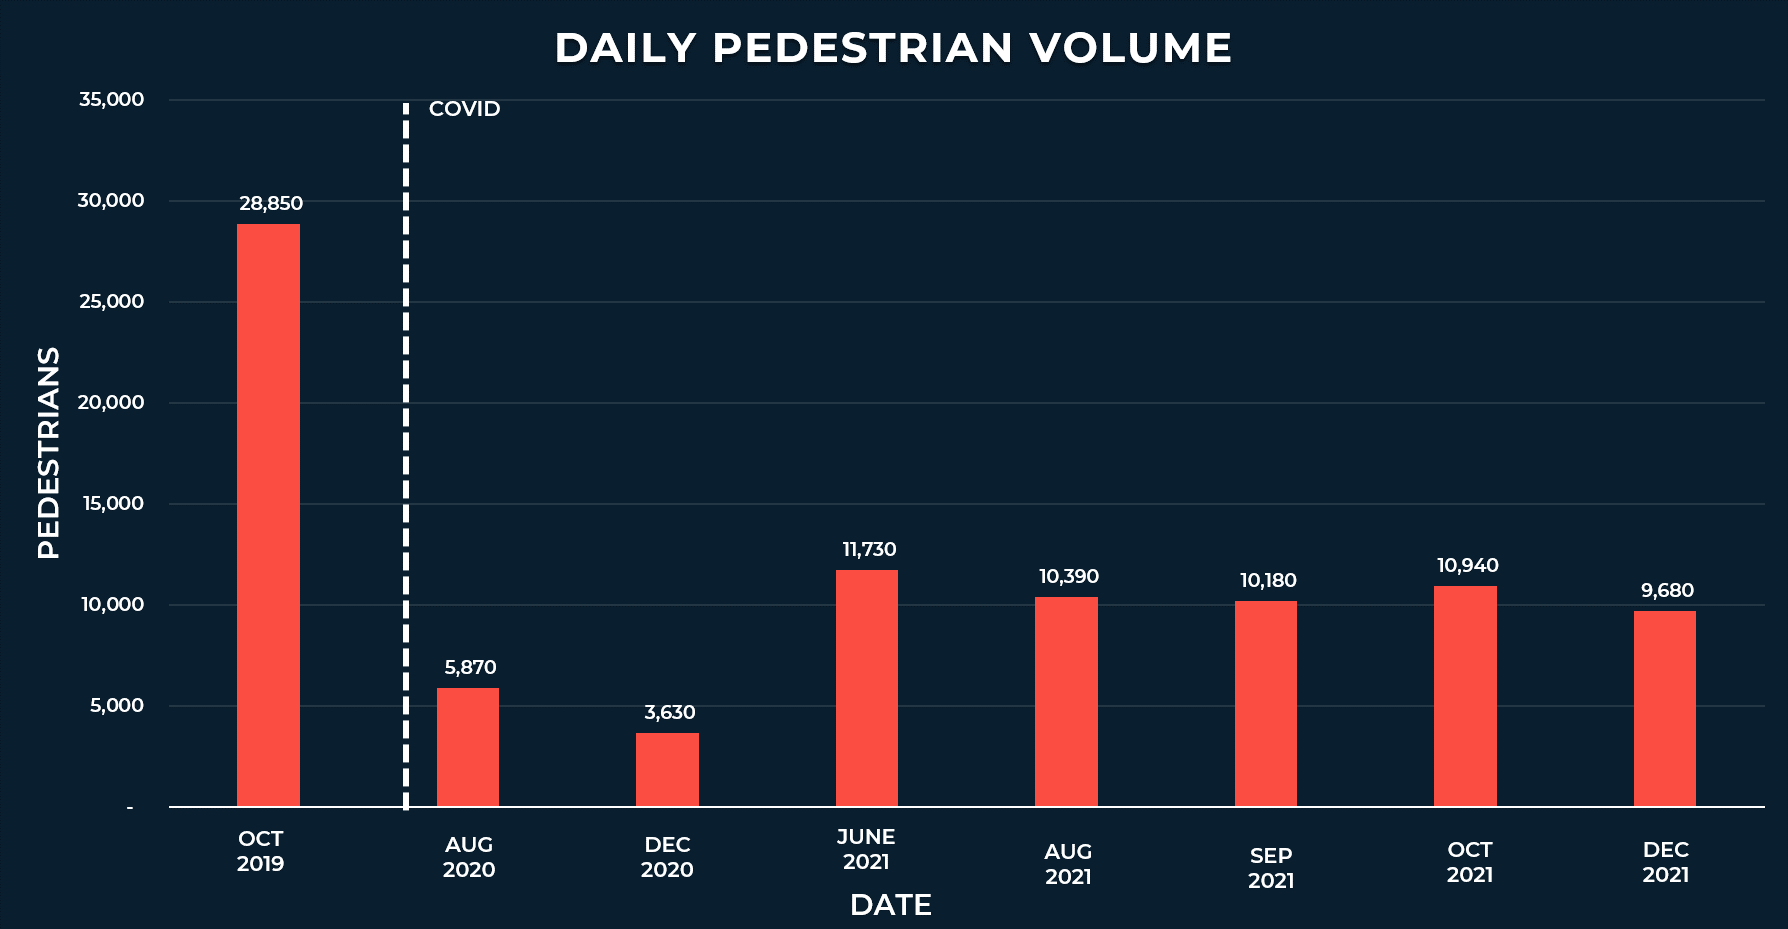 A bar graph shows approximate total daily pedestrian volumes on State Street. October 2019: 28,850 August 2020: 5,870 December 2020: 3,630 June 2021: 11,730 August 2021: 10,390 September 2021: 10,180 October 2021: 10,940 December 2021: 9,680